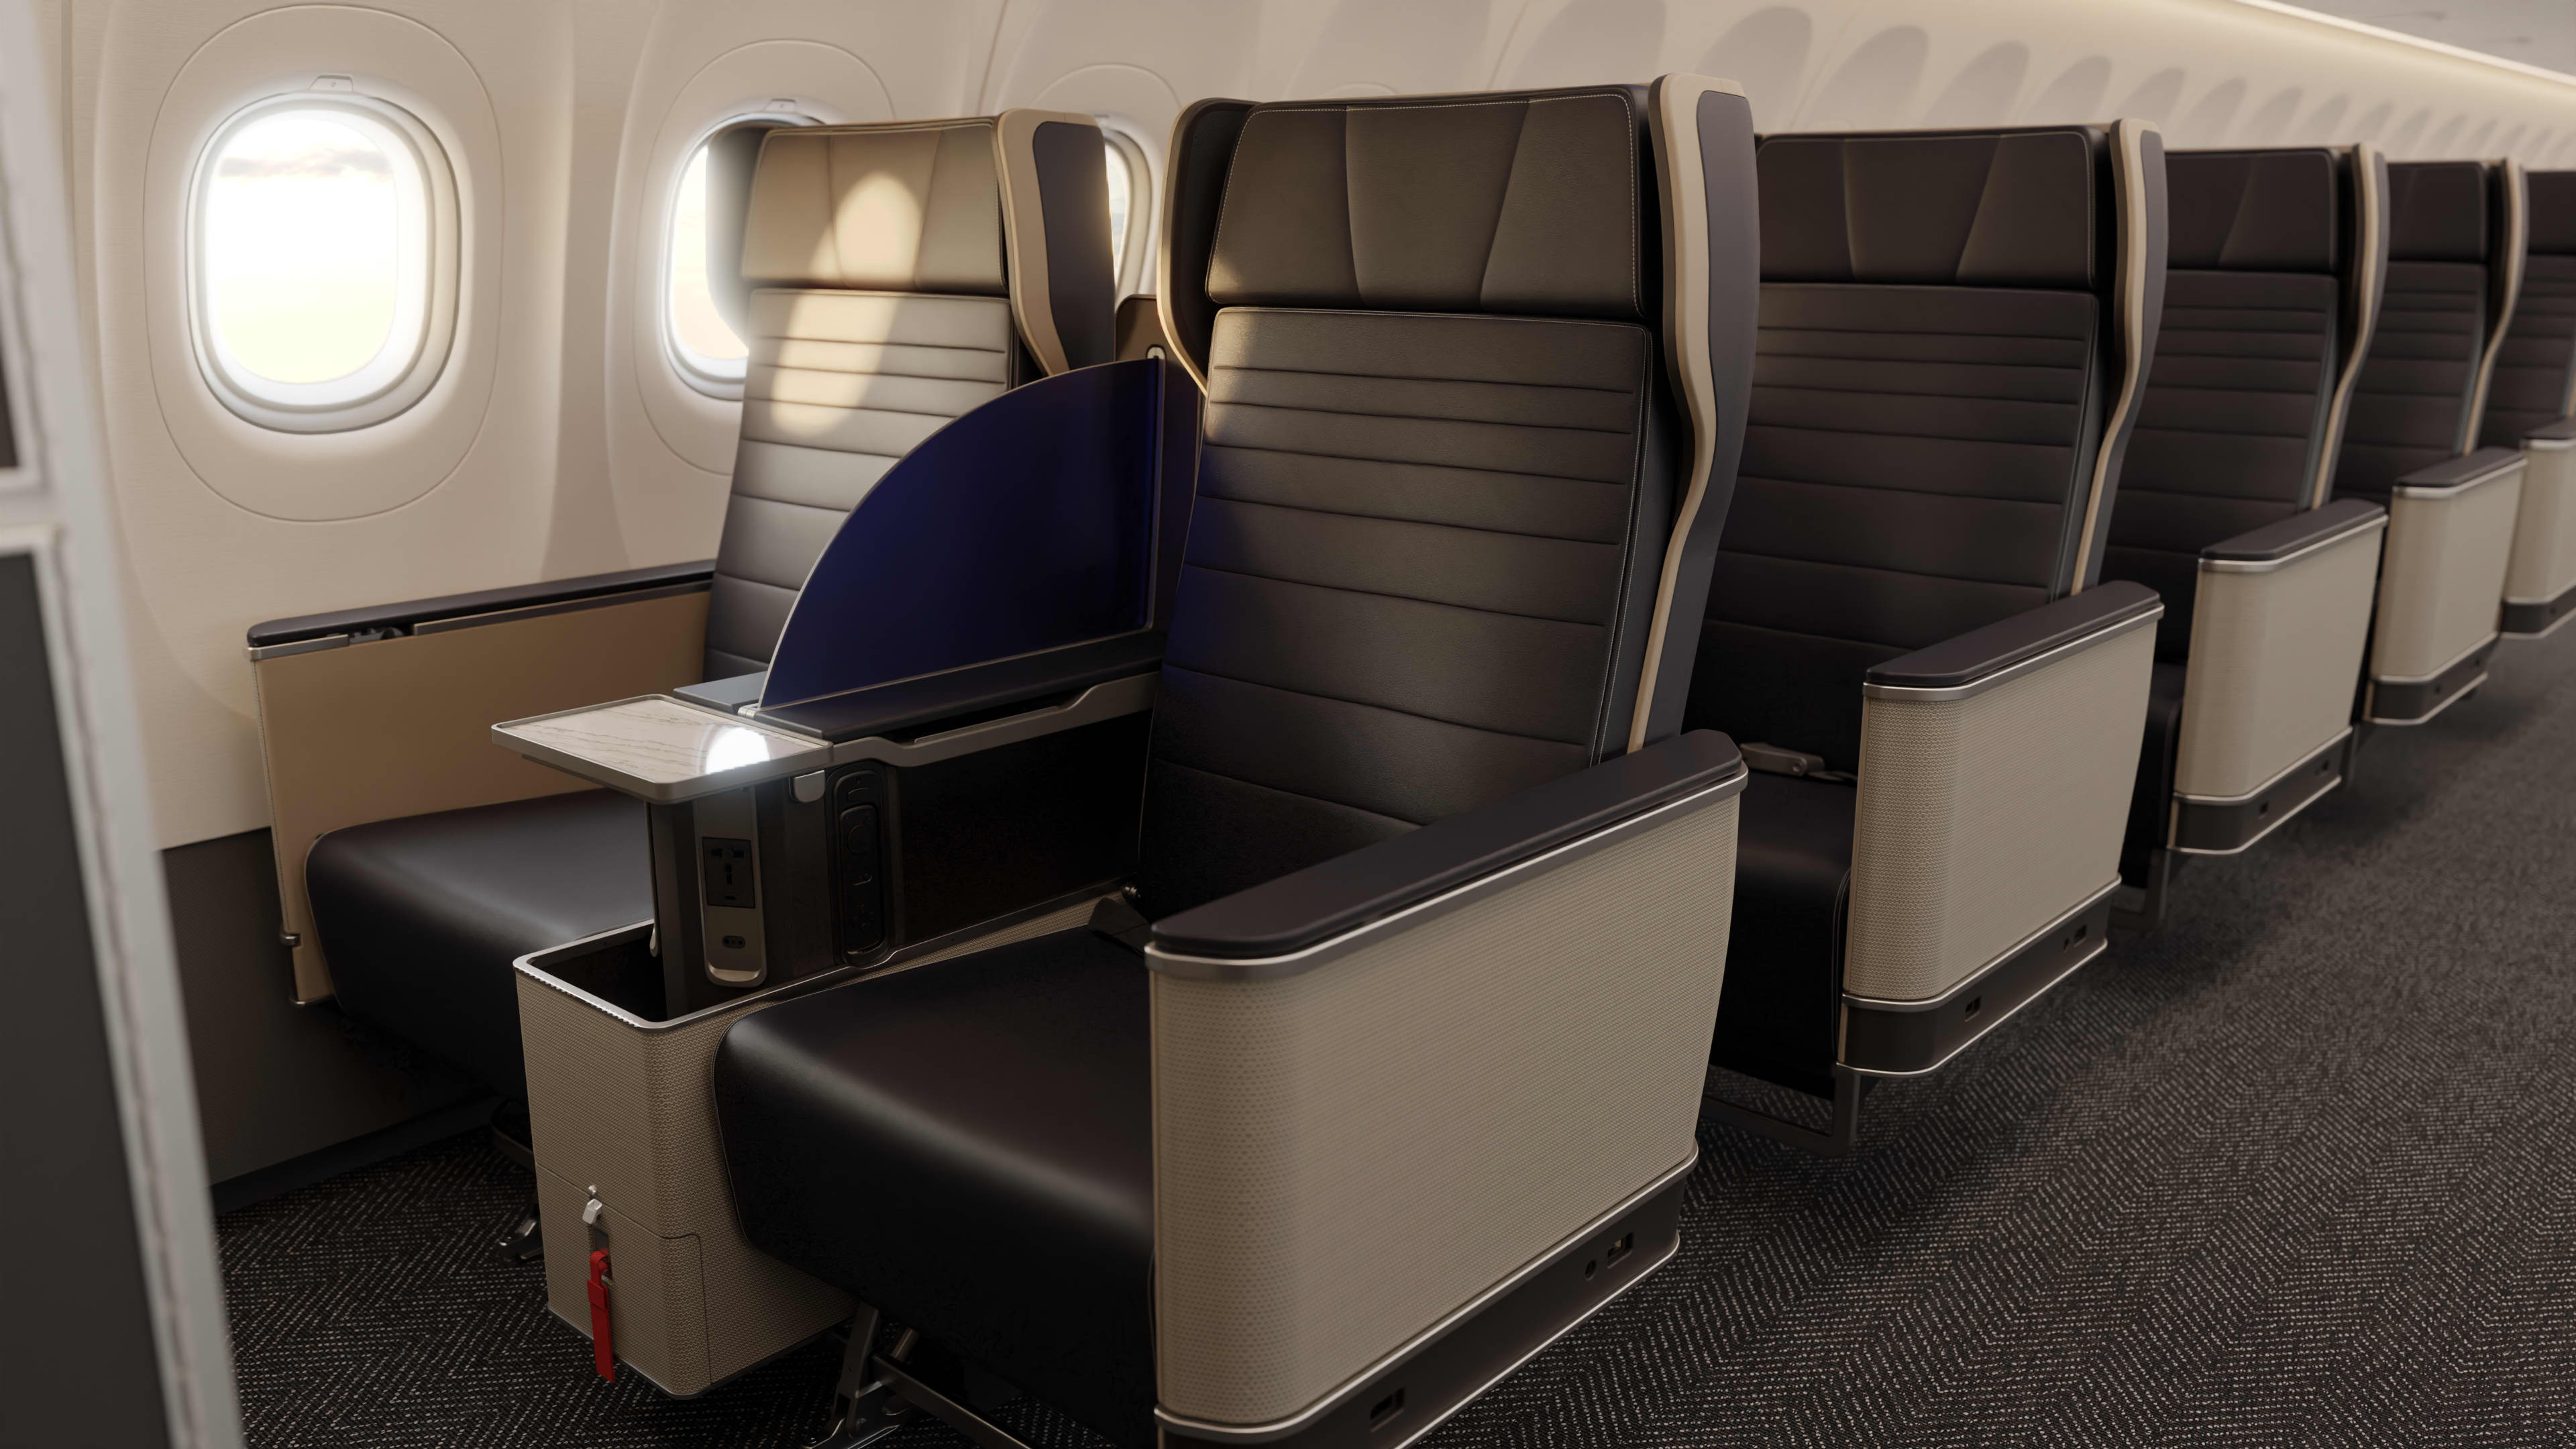 United Unveils New First Class Seats In Nearly Once A Decade Refresh